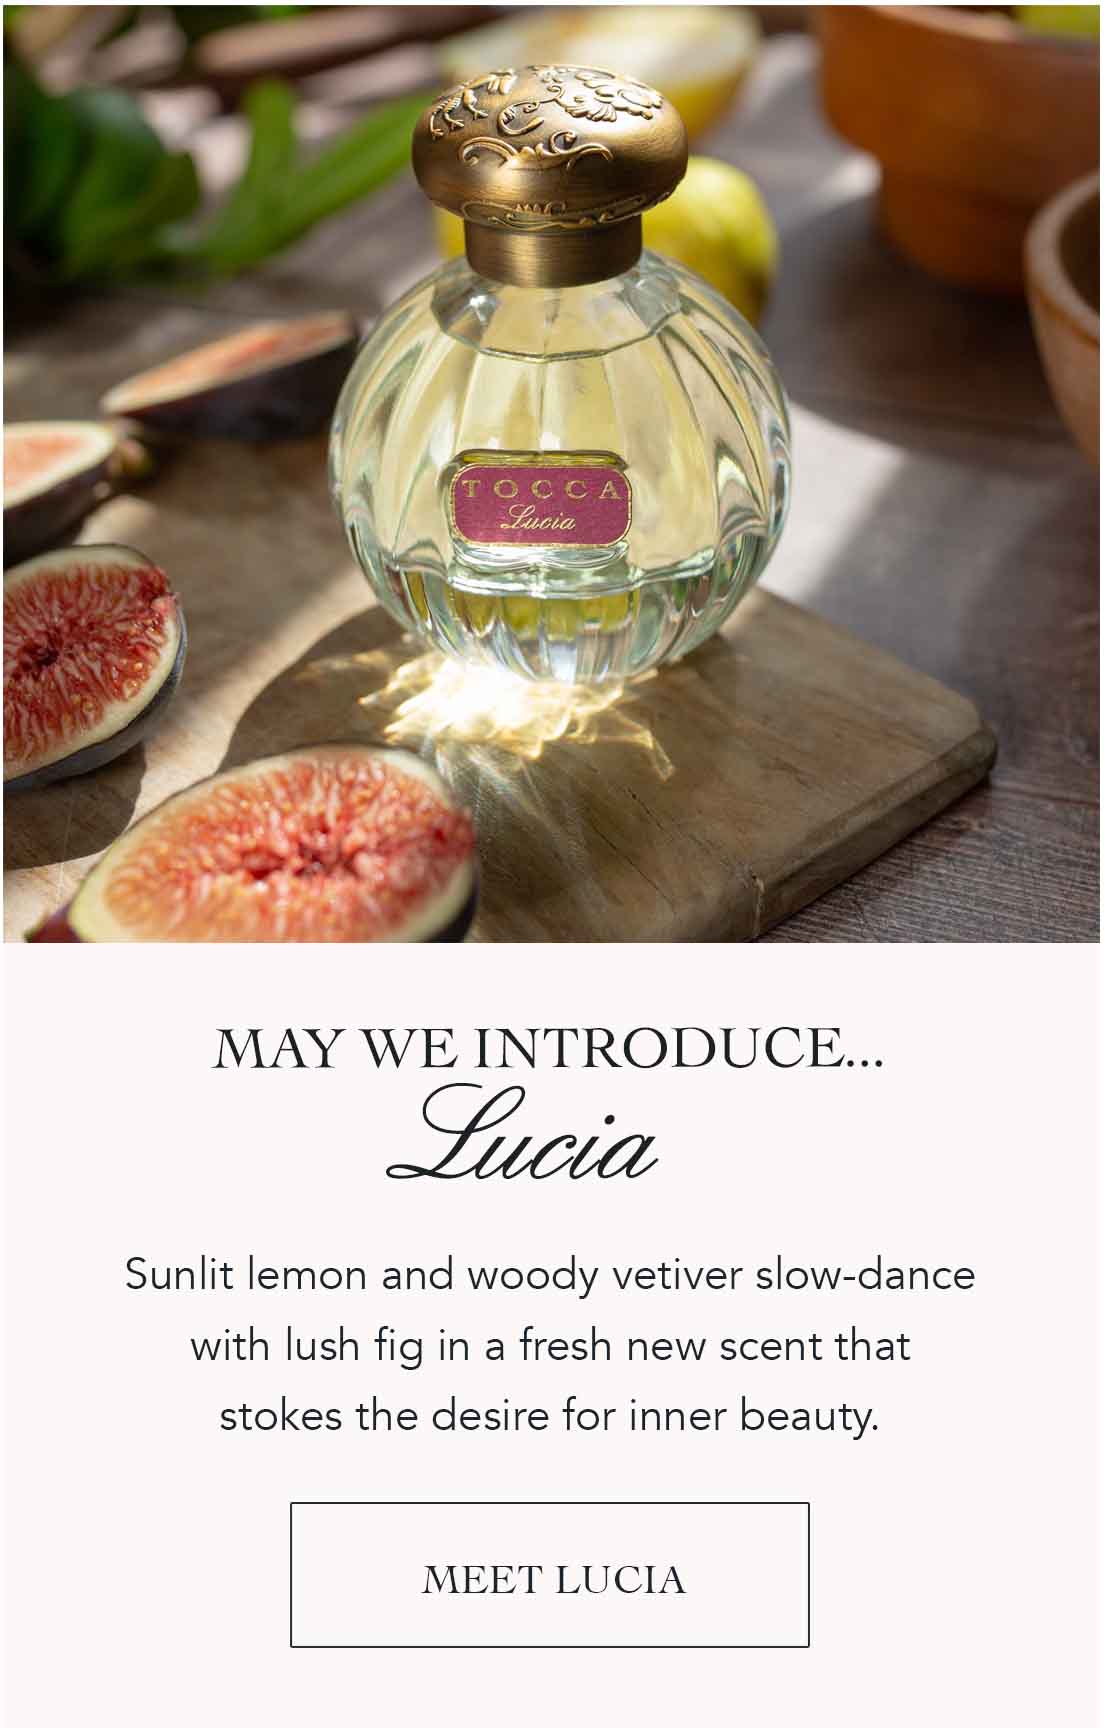 May we introduce Lucia. Sunlit lemon and wood vetiver slow-dance with lush fig in a fresh new scent that stokes the desire for inner beauty. MEET LUCIA